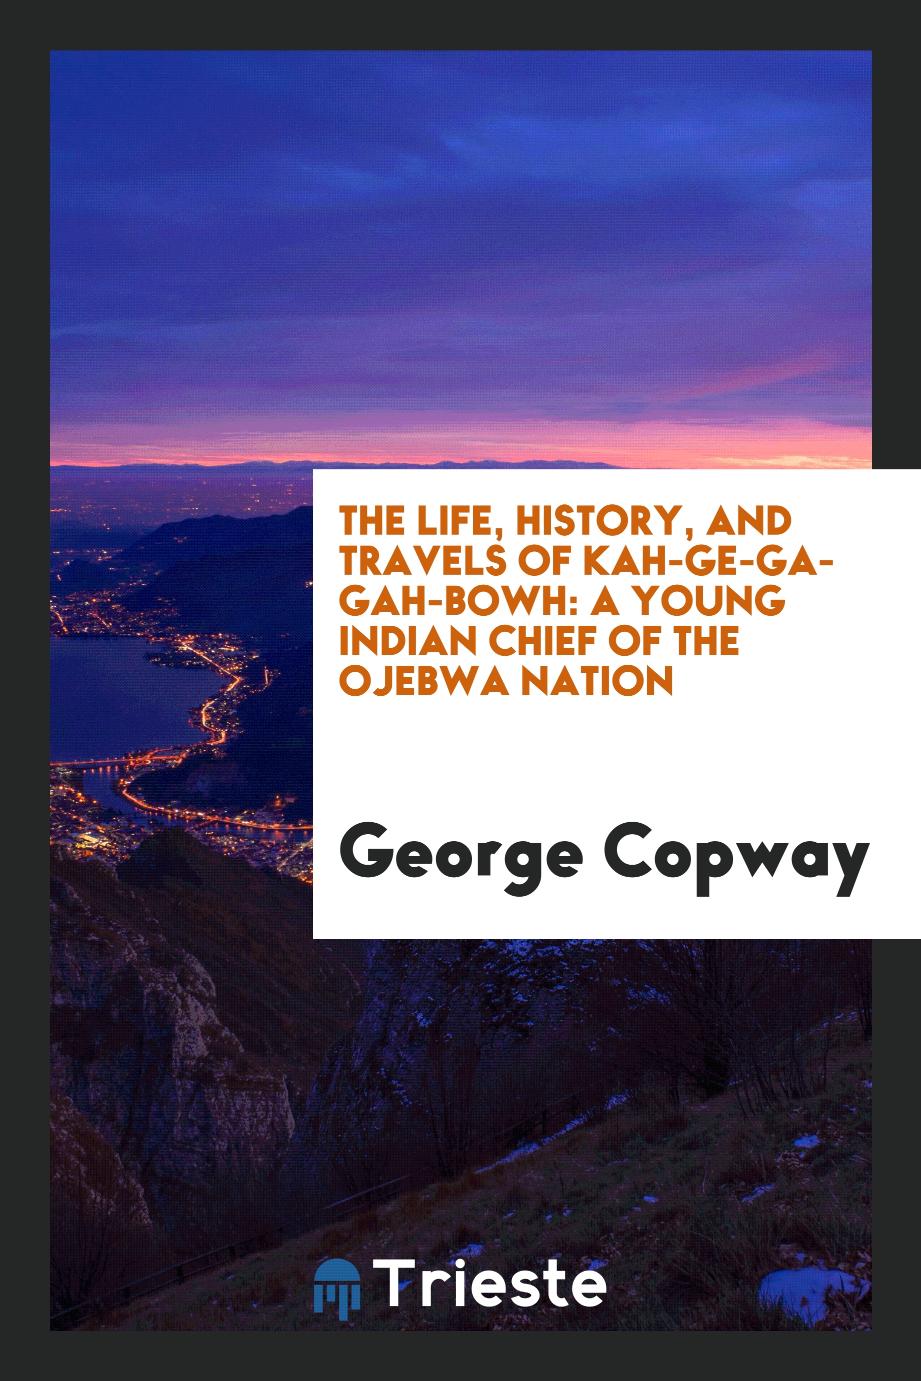 The Life, History, and Travels of Kah-ge-ga-gah-bowh: A Young Indian Chief of the Ojebwa Nation